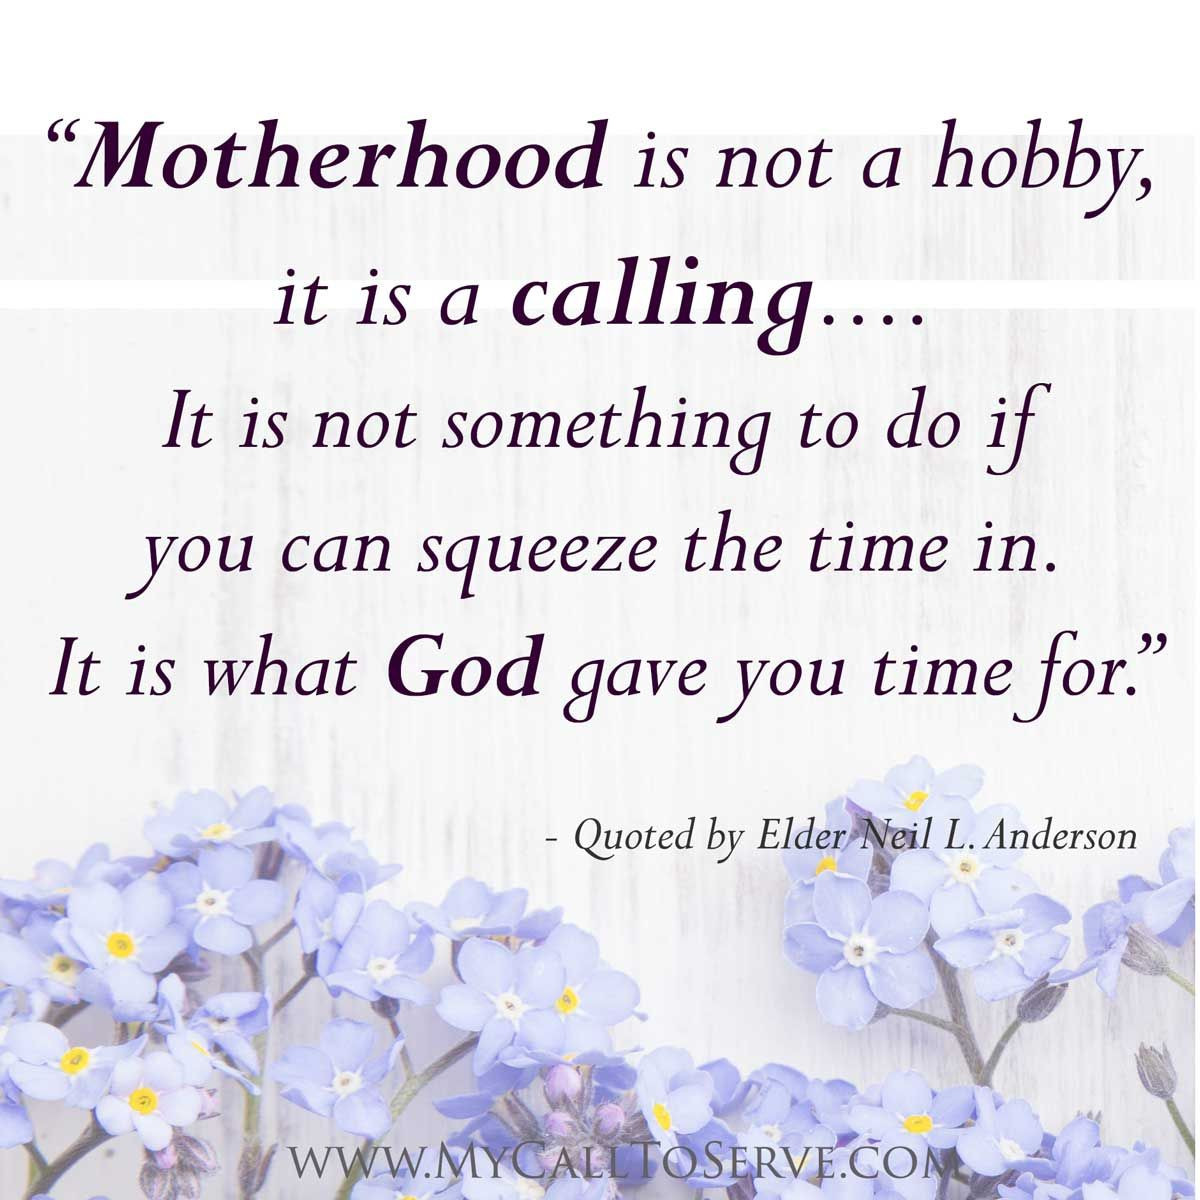 Lds Quotes About Mothers
 Beautiful LDS Mother s Day Quotes